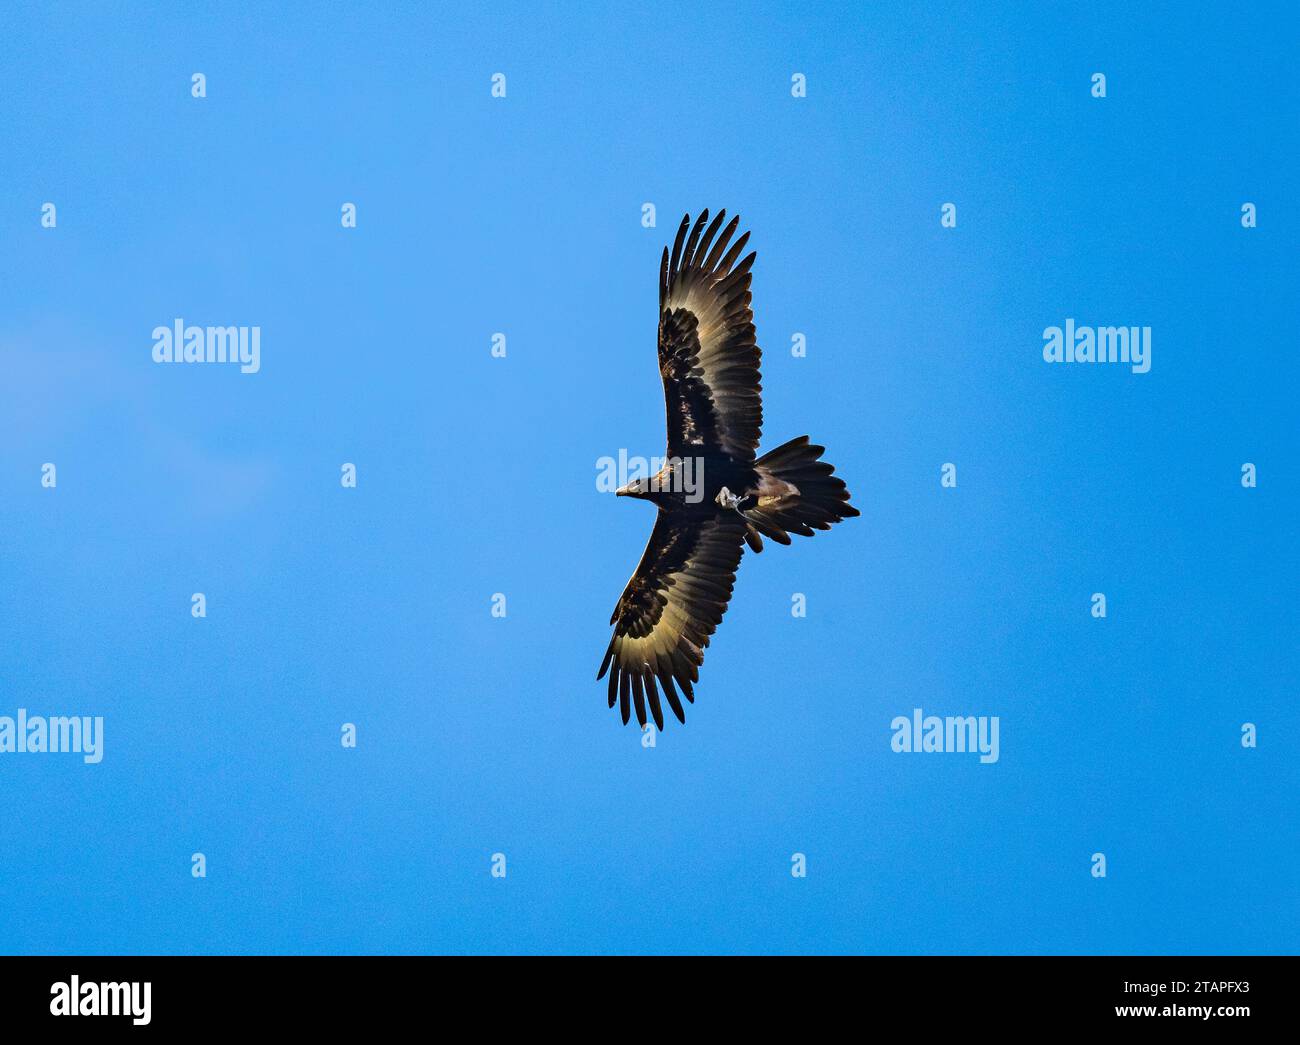 A Wedge-tailed Eagle (Aquila audax) soaring in blue sky. New South Wales, Australia. Stock Photo